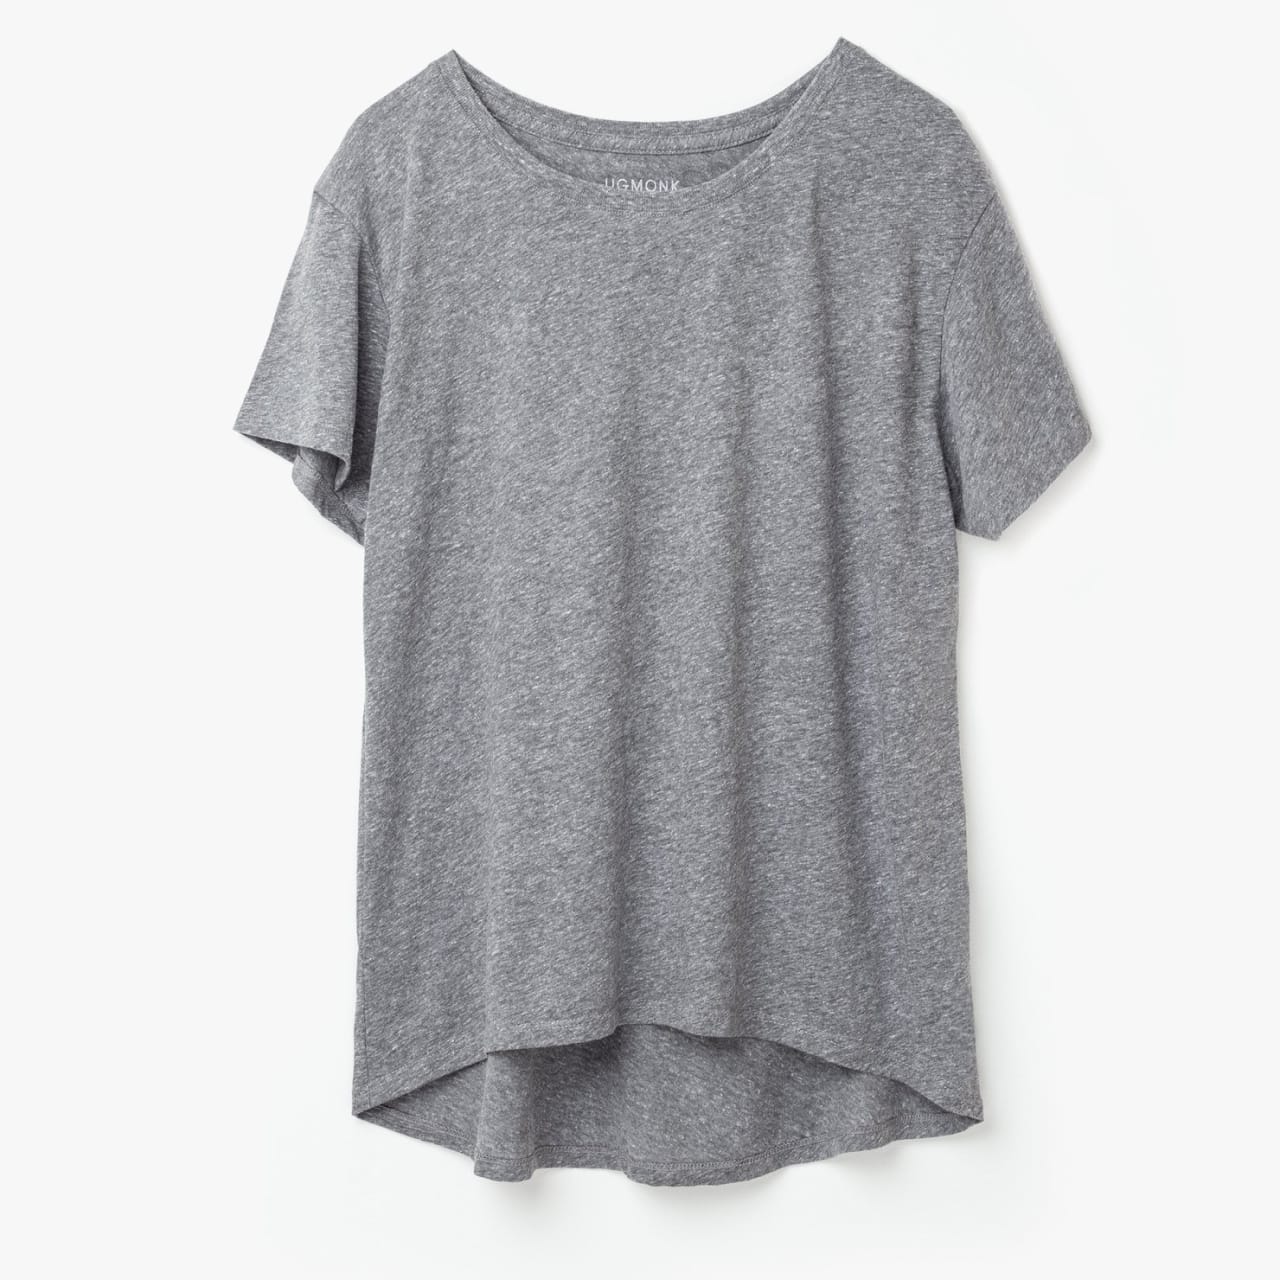 Front of women's basic tee in heather gray.